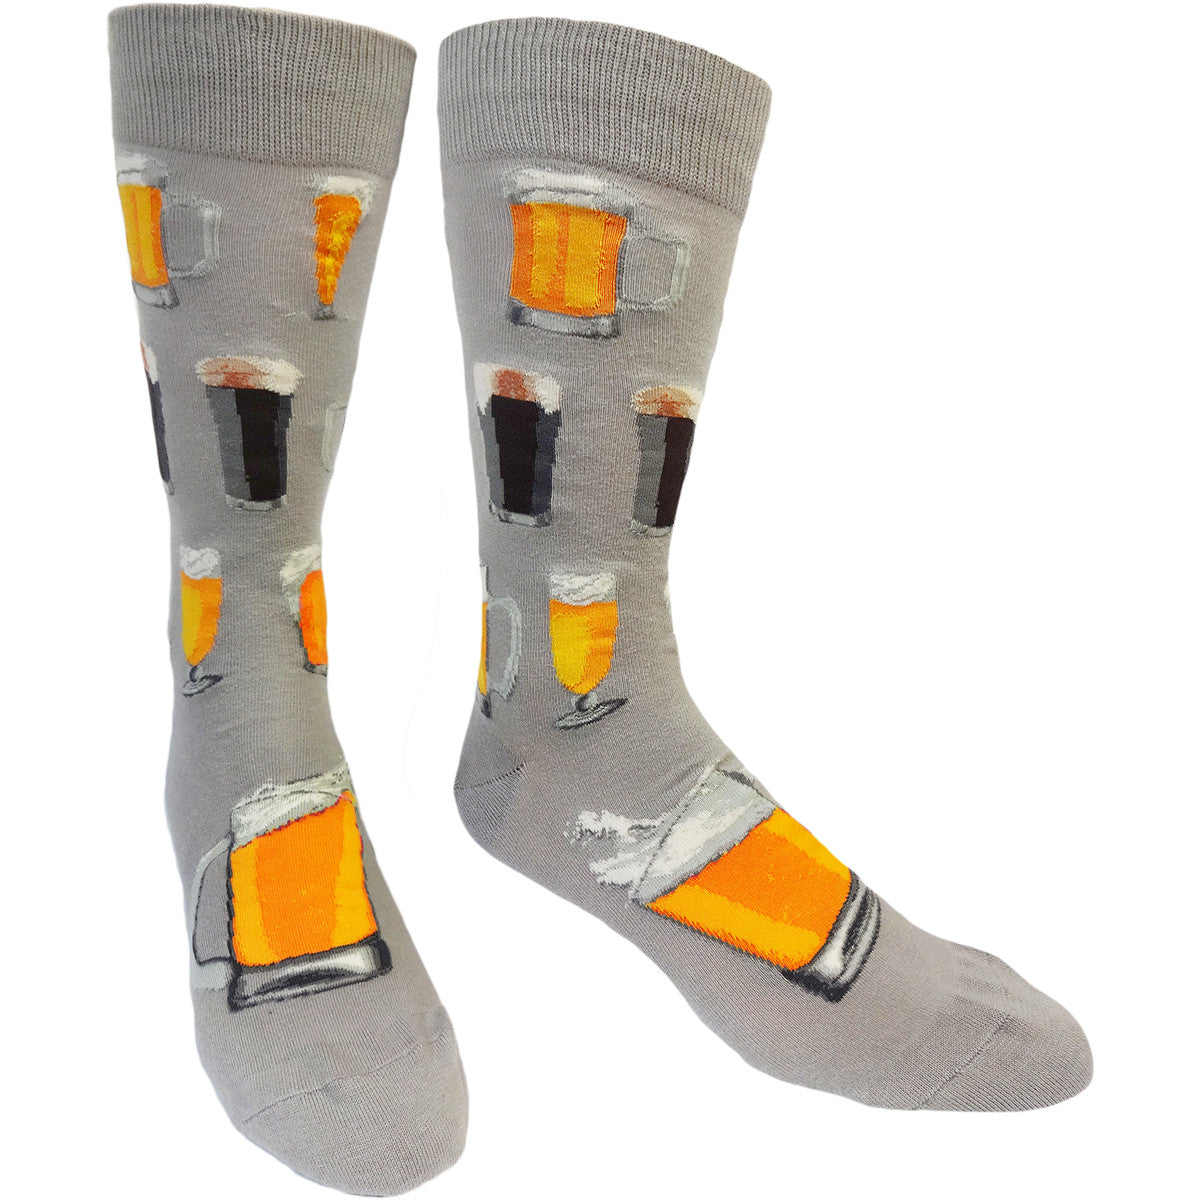 Show off your exBEERience during a night out with a pair from our Drinking Socks collection, showing off drinks of all types in both men's and women's sizes, including these grey men's crew socks featuring dark and light tap beers in glass beer mugs.